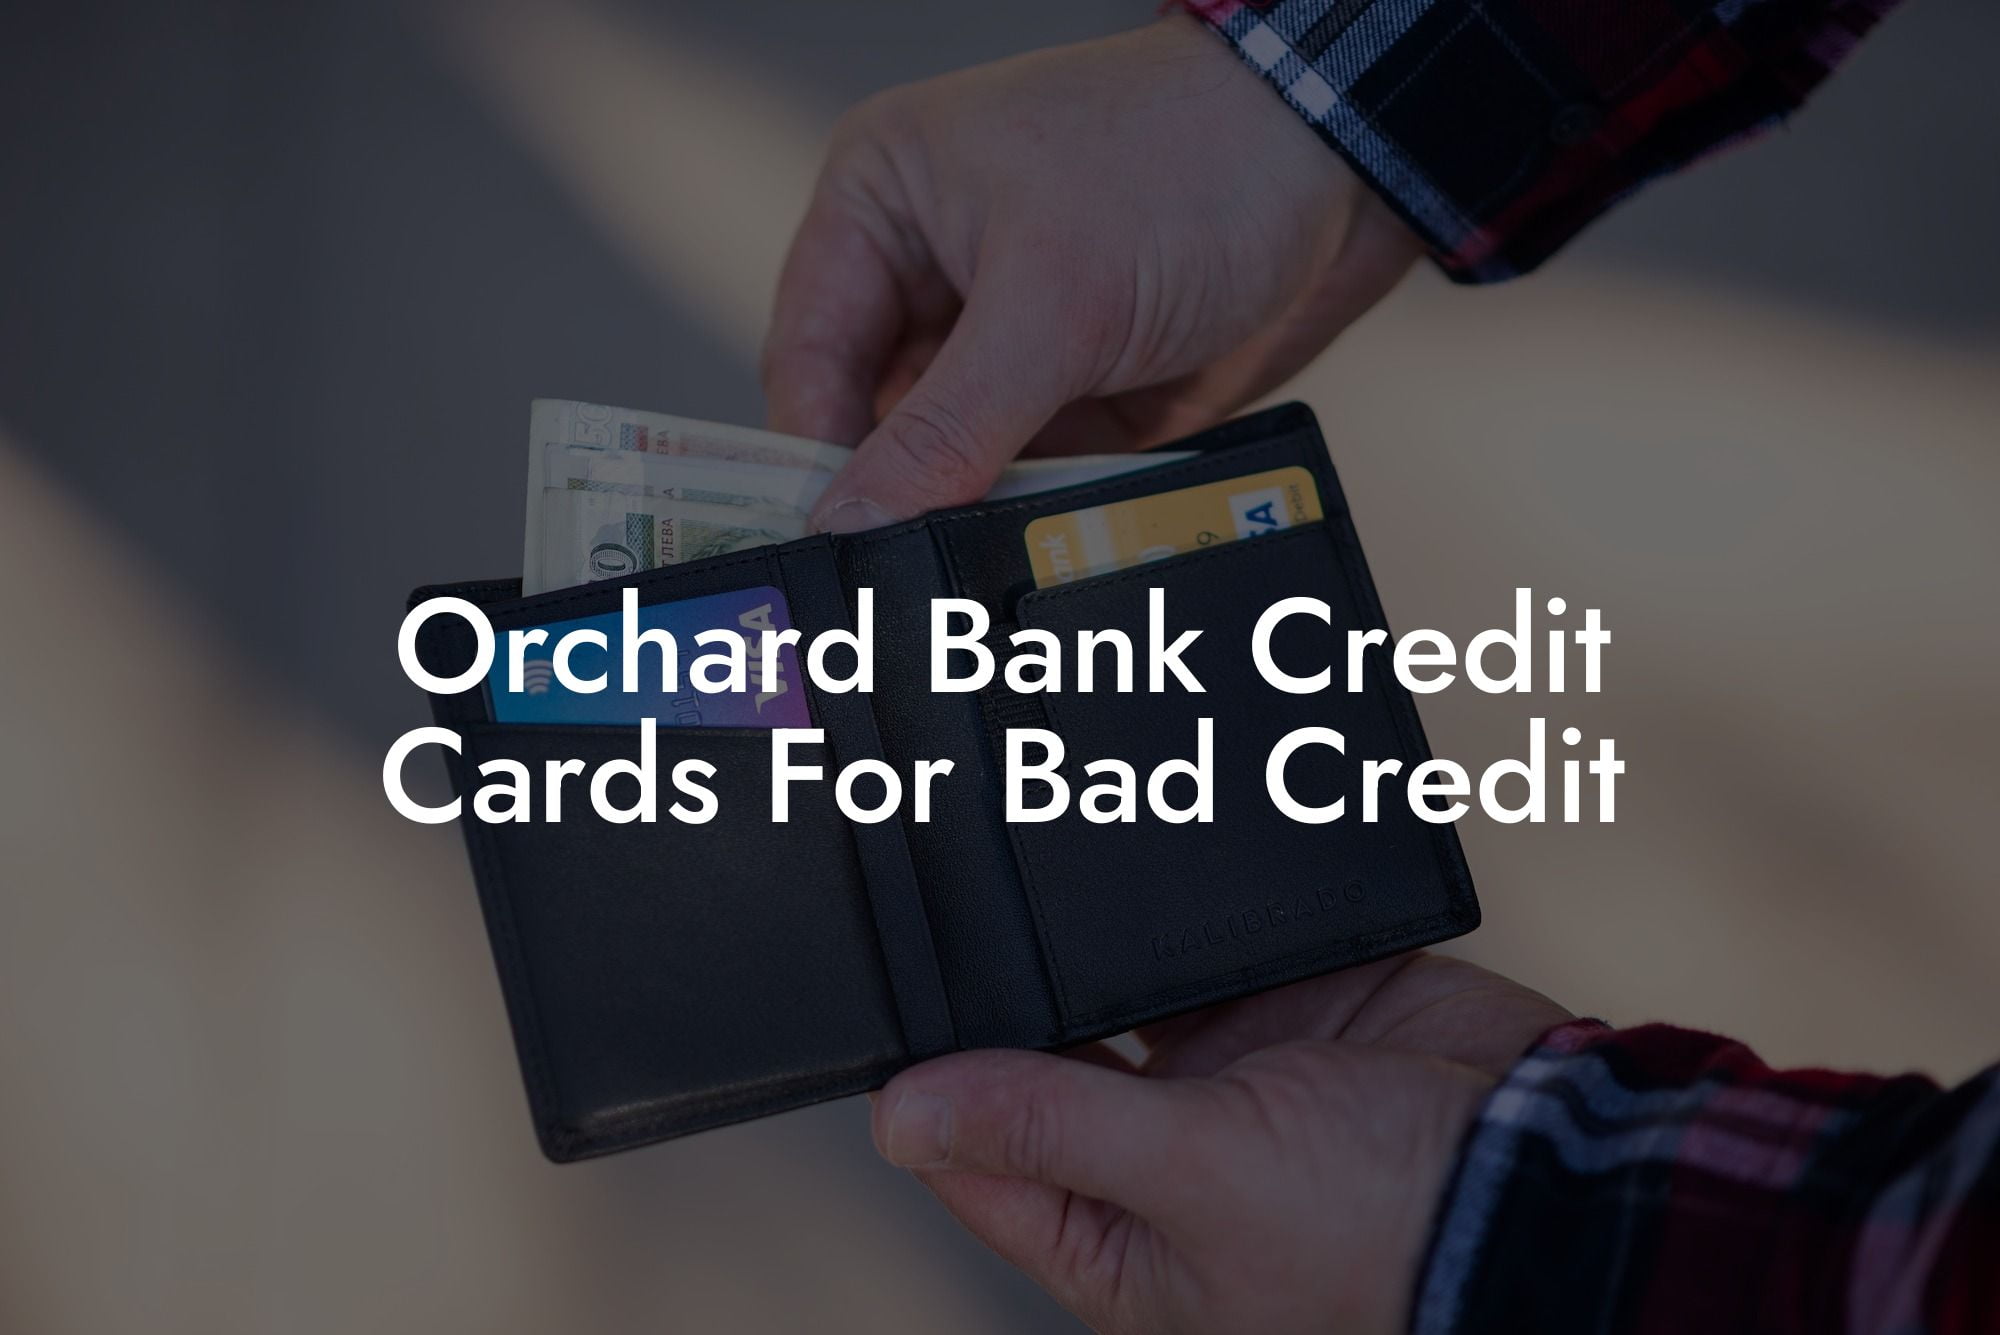 Orchard Bank Credit Cards For Bad Credit